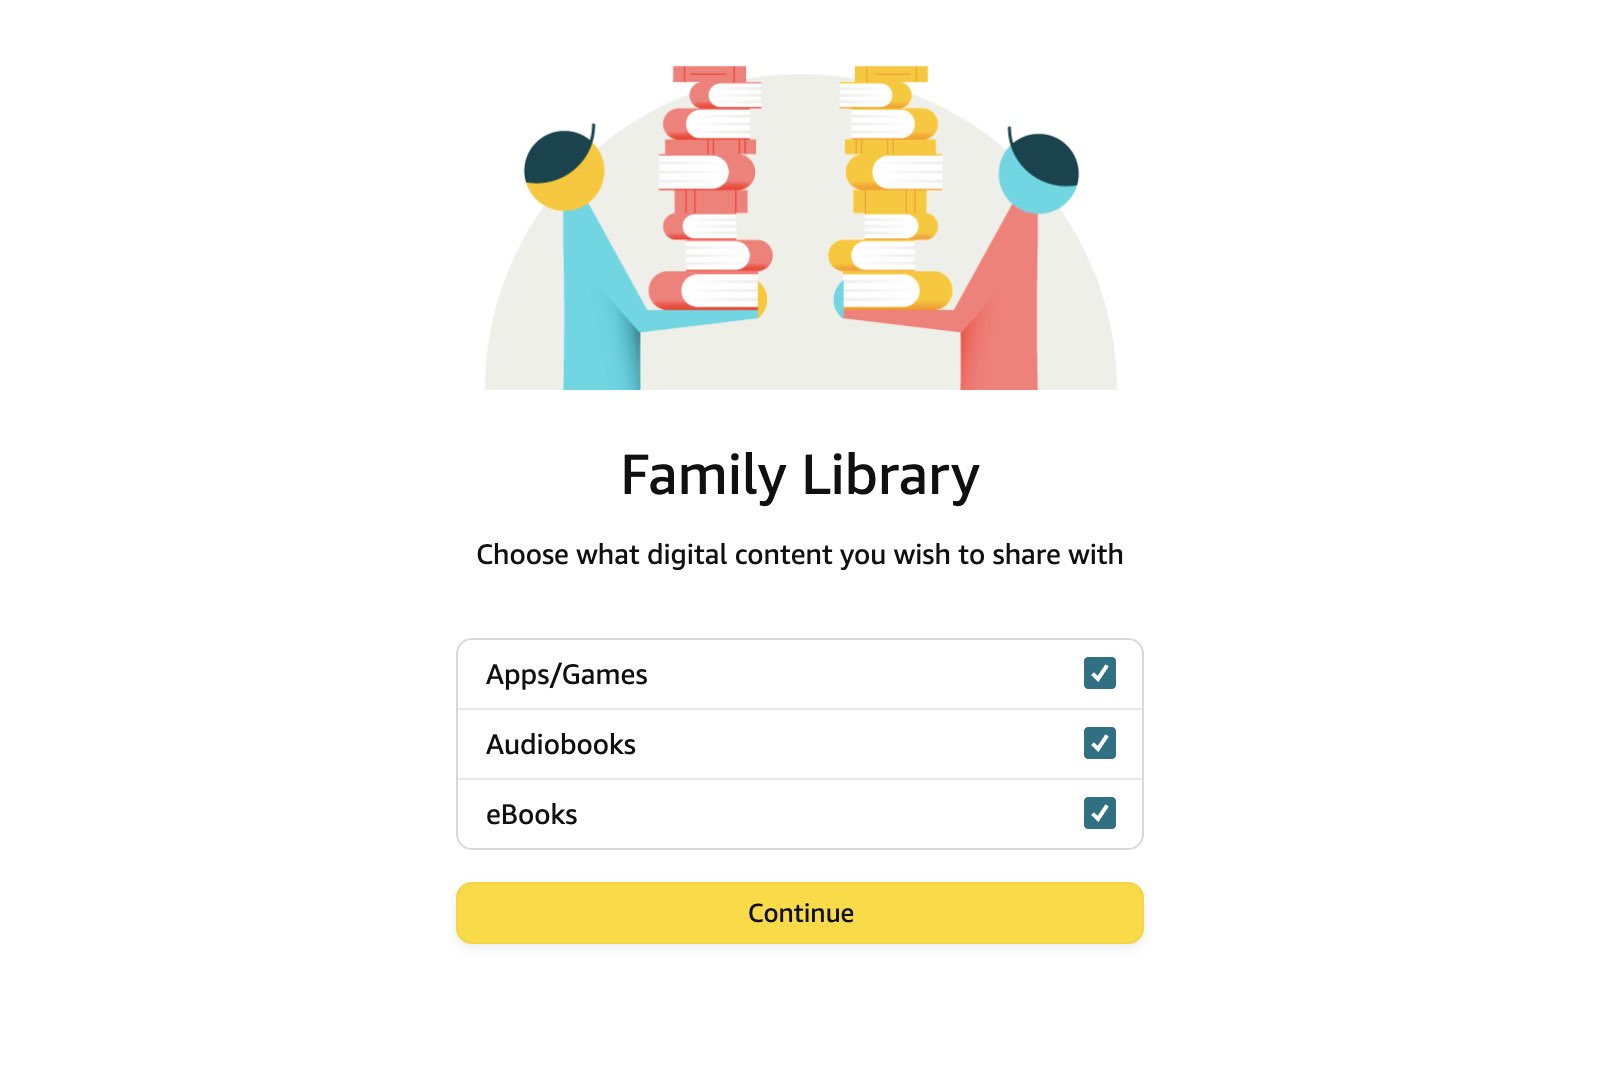 Family library sharing игры. Как включить Family Library. Family Library sharing как включить. Как добавить Family Library sharing.